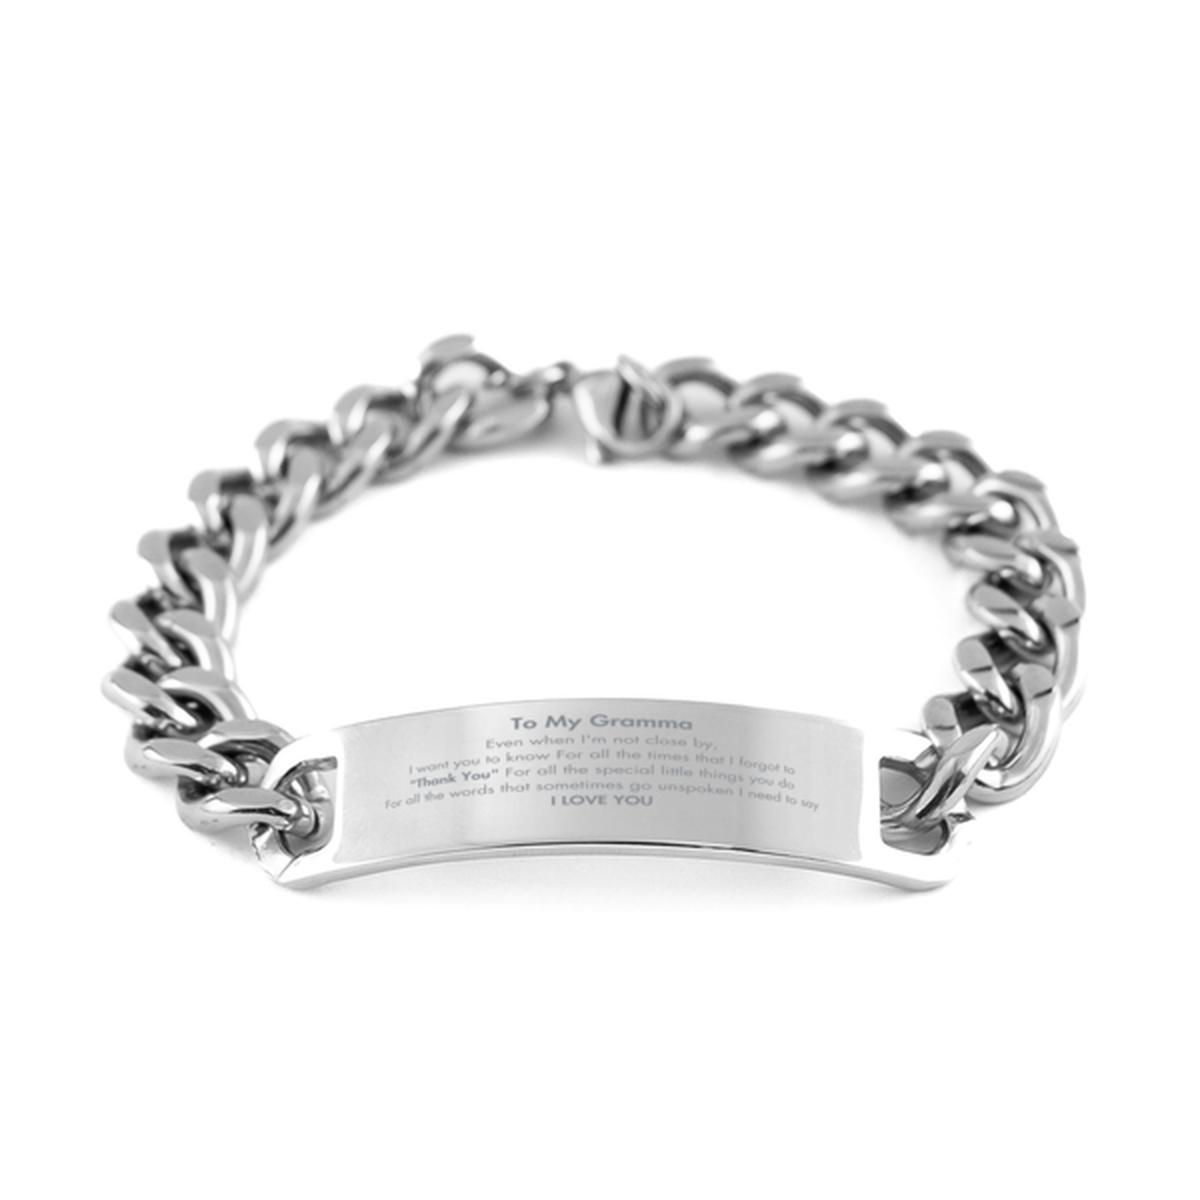 Thank You Gifts for Gramma, Keepsake Cuban Chain Stainless Steel Bracelet Gifts for Gramma Birthday Mother's day Father's Day Gramma For all the words That sometimes go unspoken I need to say I LOVE YOU